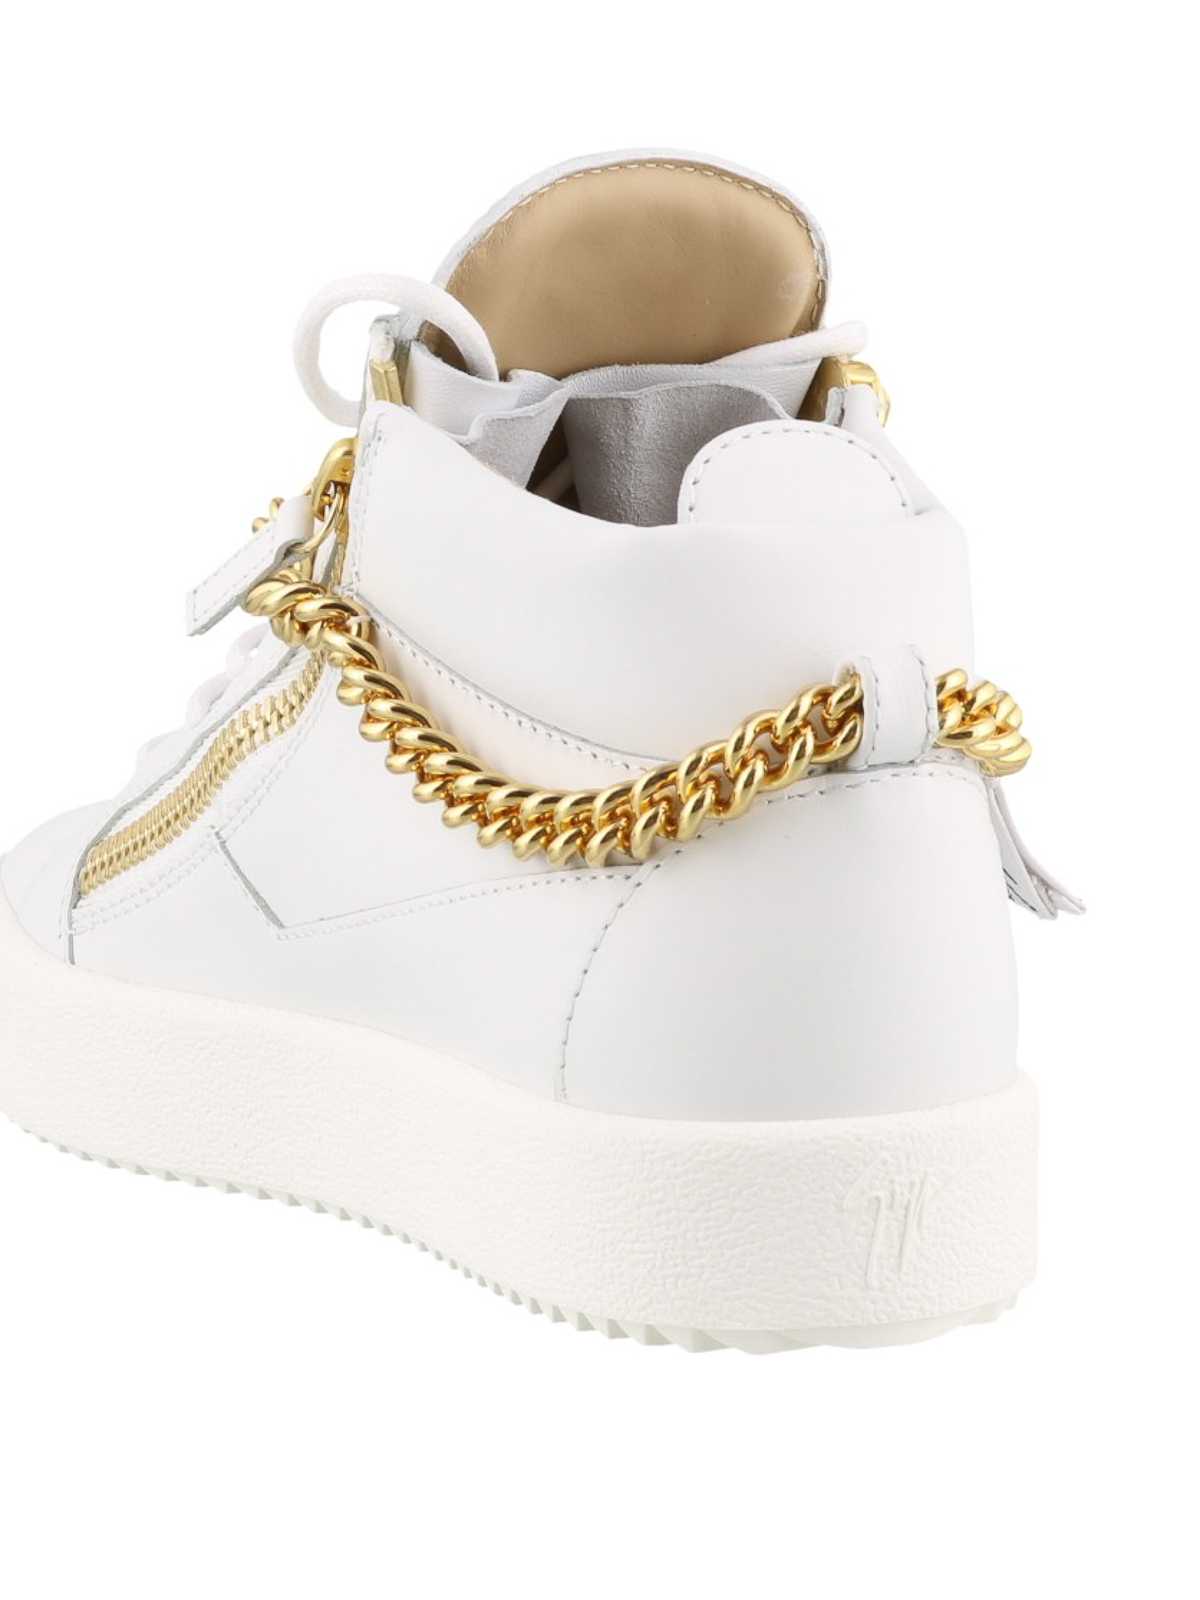 Trainers Giuseppe Zanotti - leather high-top sneakers -